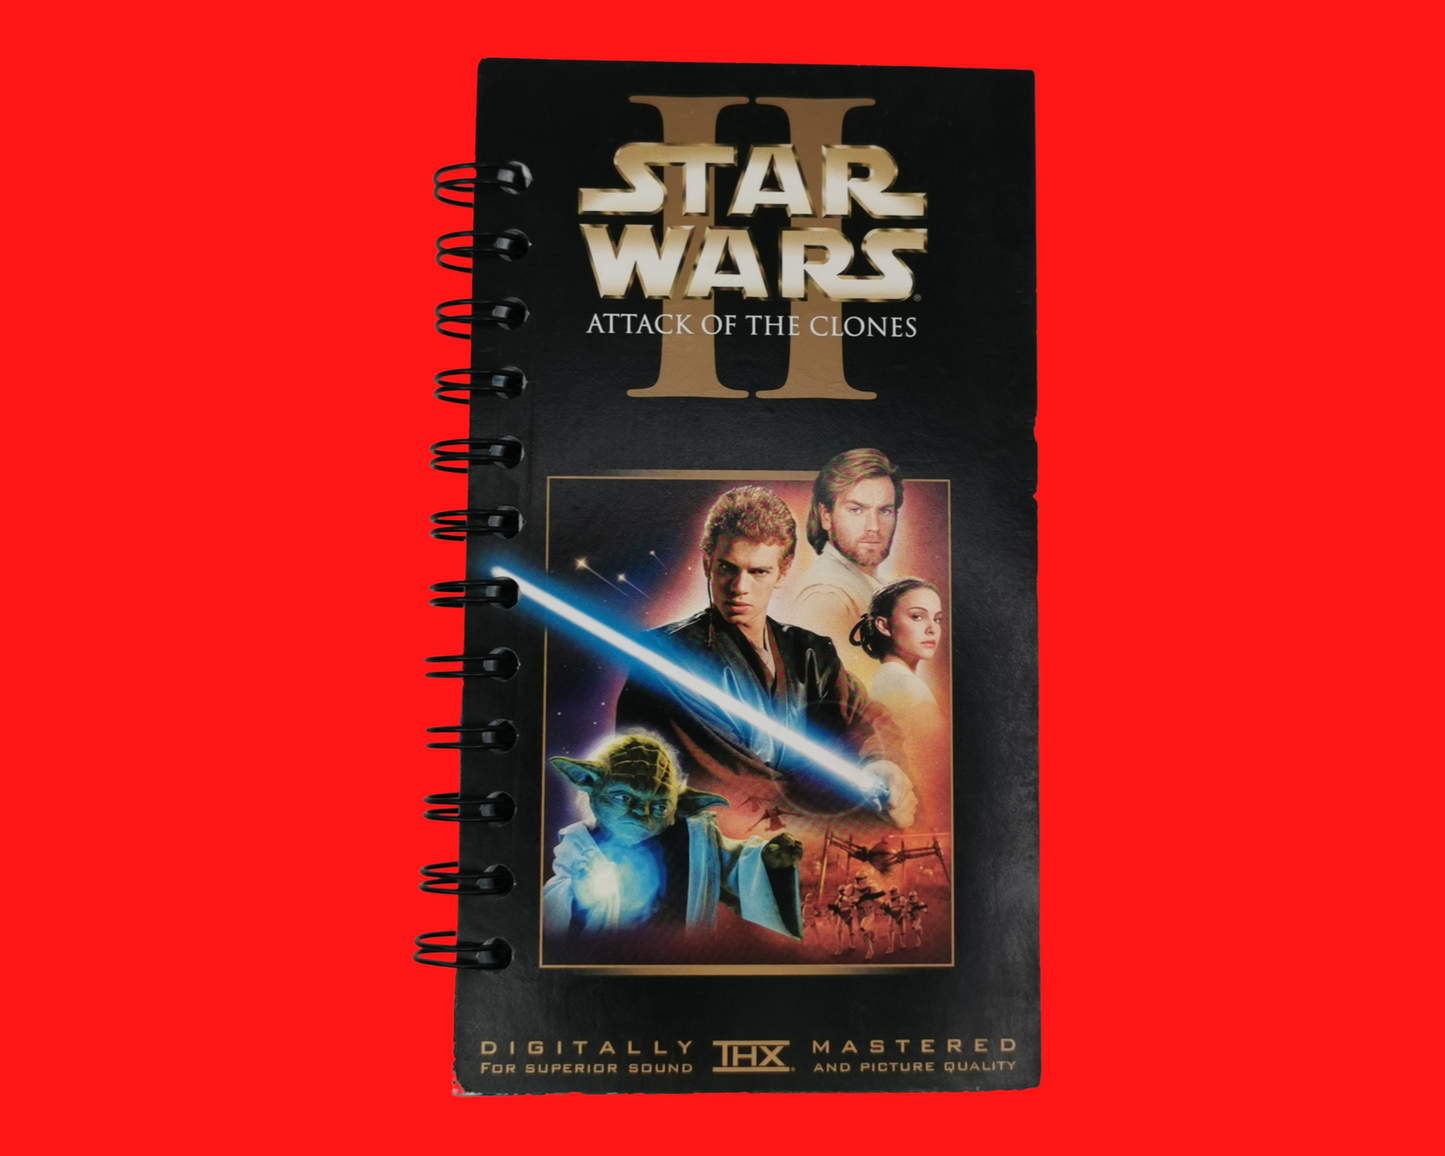 Star Wars Attack of the Clones VHS Movie Notebook